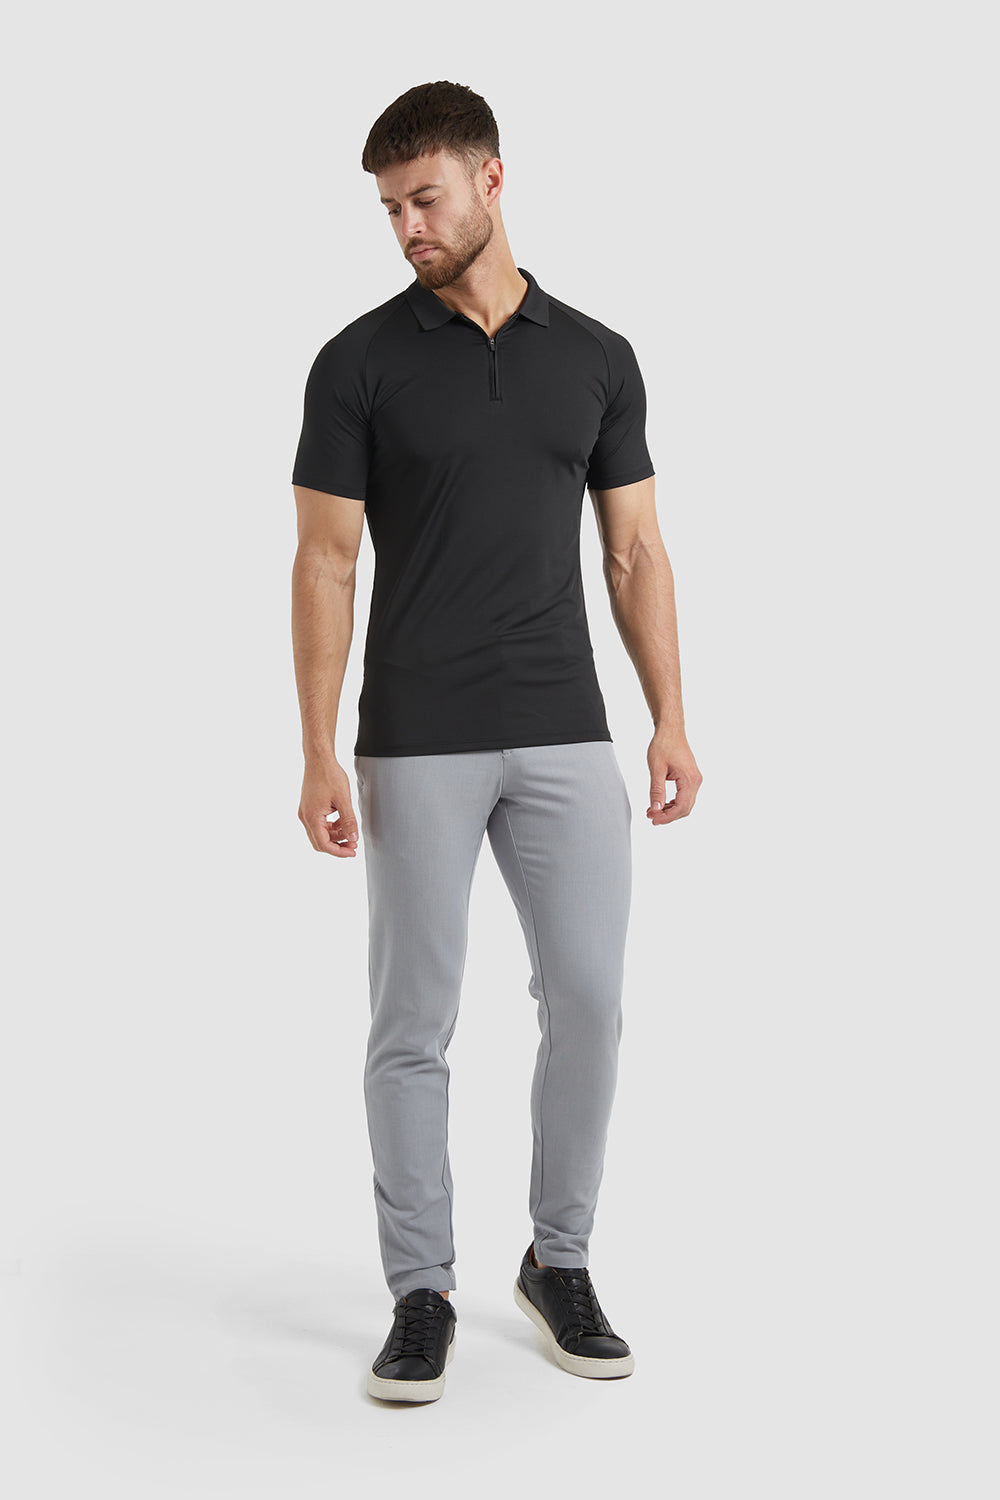 Performance Polo Shirt in Black - TAILORED ATHLETE - ROW